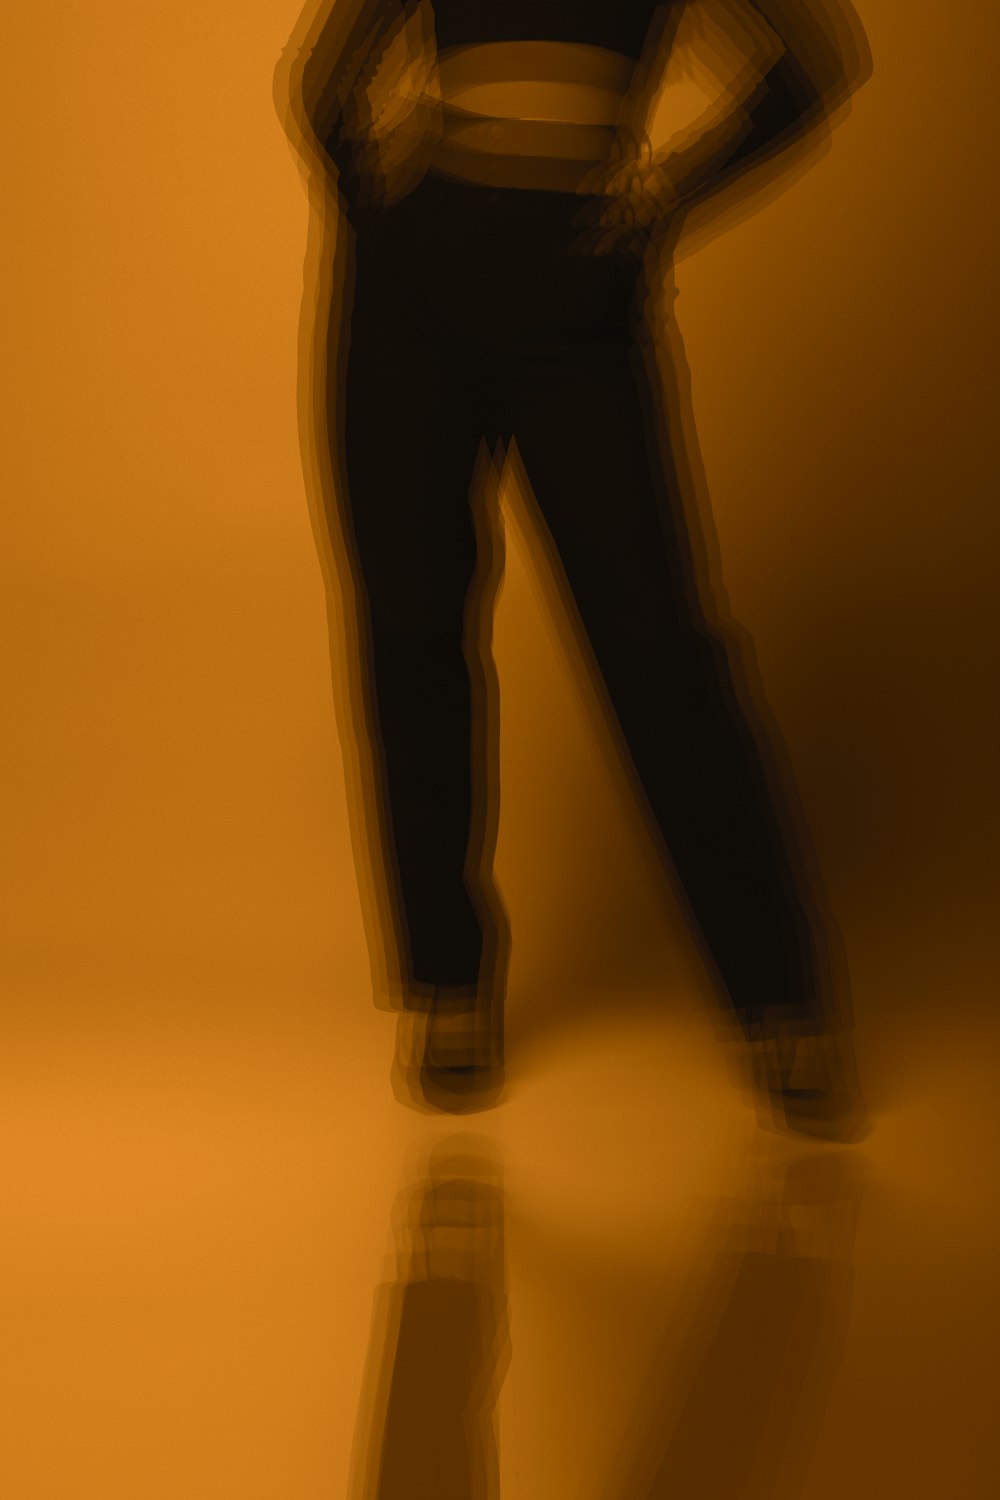 silhouette of person wearing black pants and black shoes